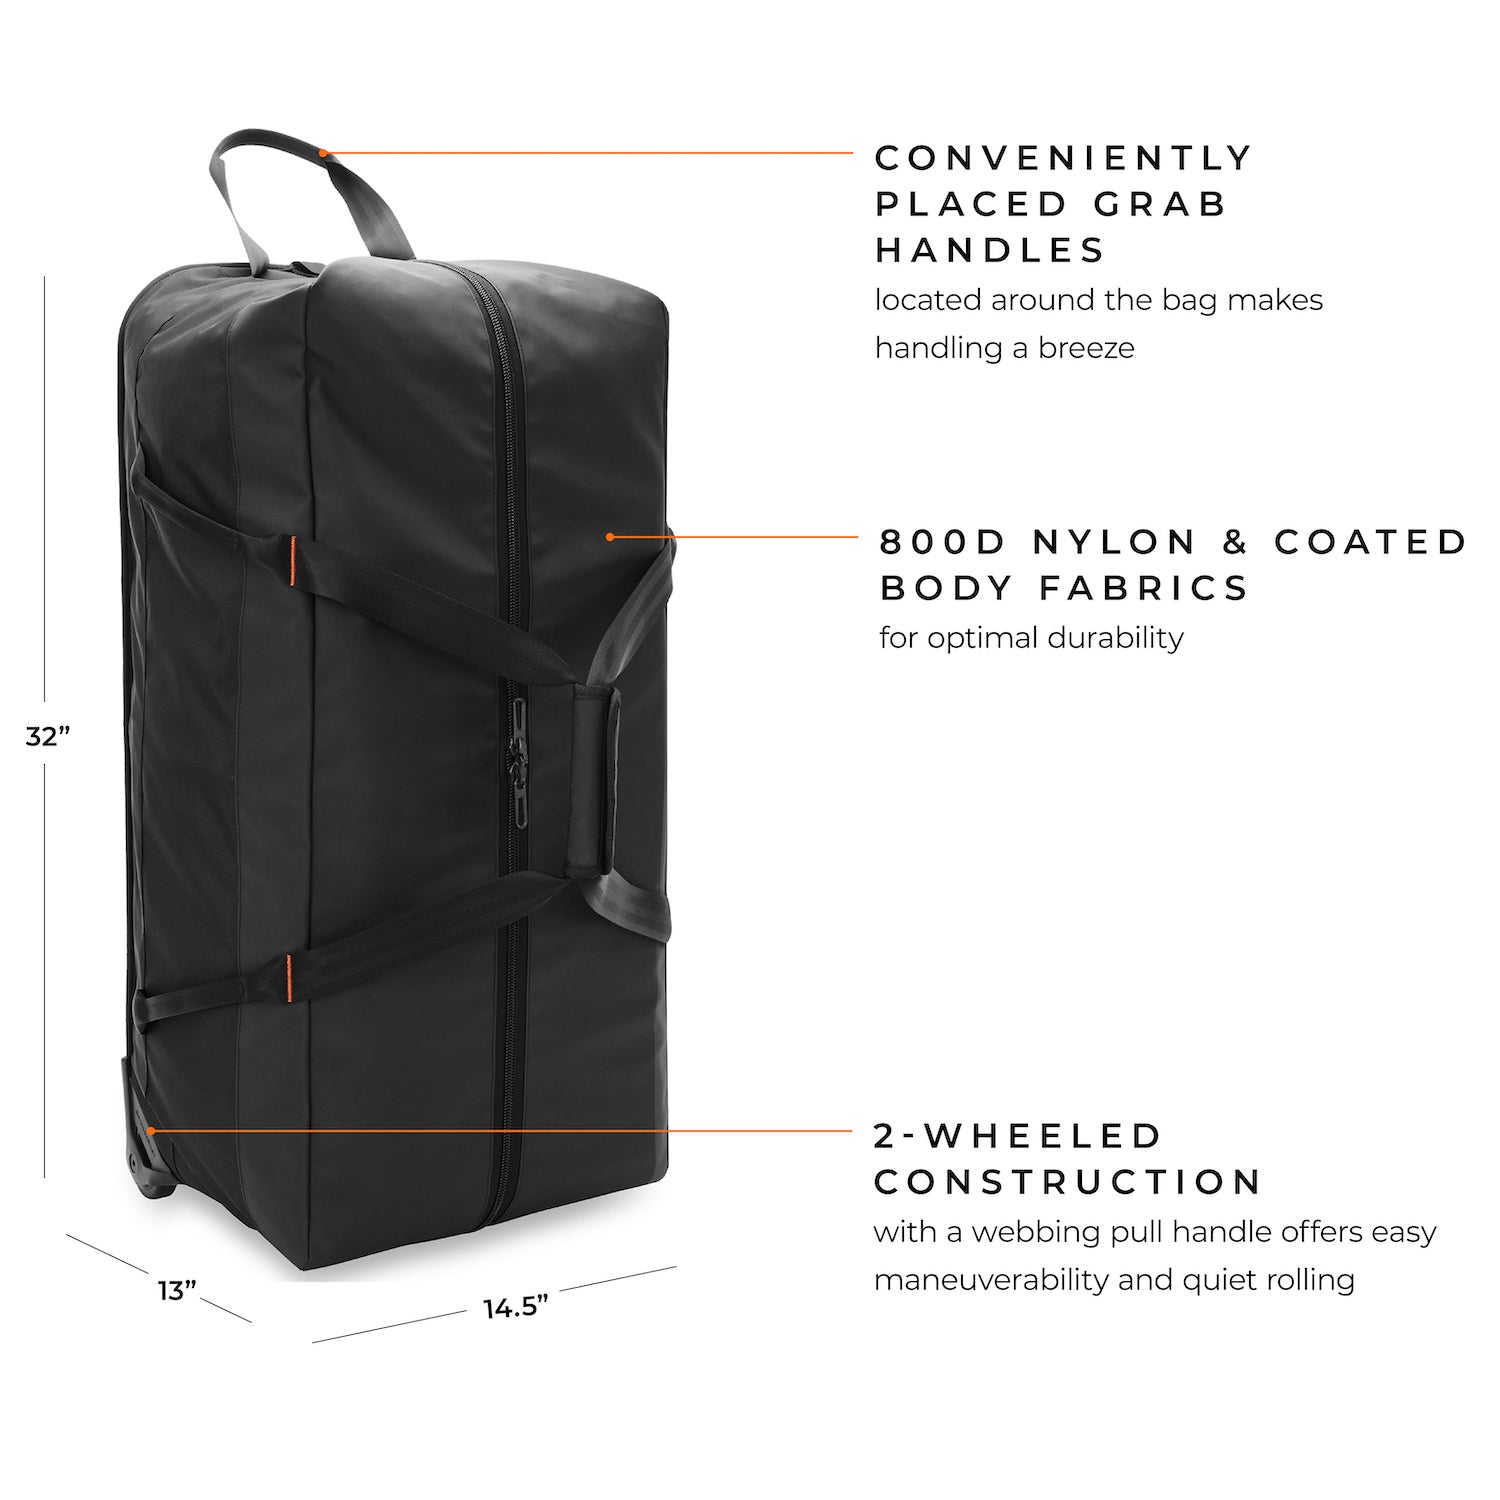 briggs & riley extra large rolling duffle conveniently placed grab handles located around the bag makes handling a breeze, 800d nylon & coated body fabrics for optimal durability, 2-wheeled construction with a webbing pull handle offers easy maneuverability and quiet rolling  #color_black